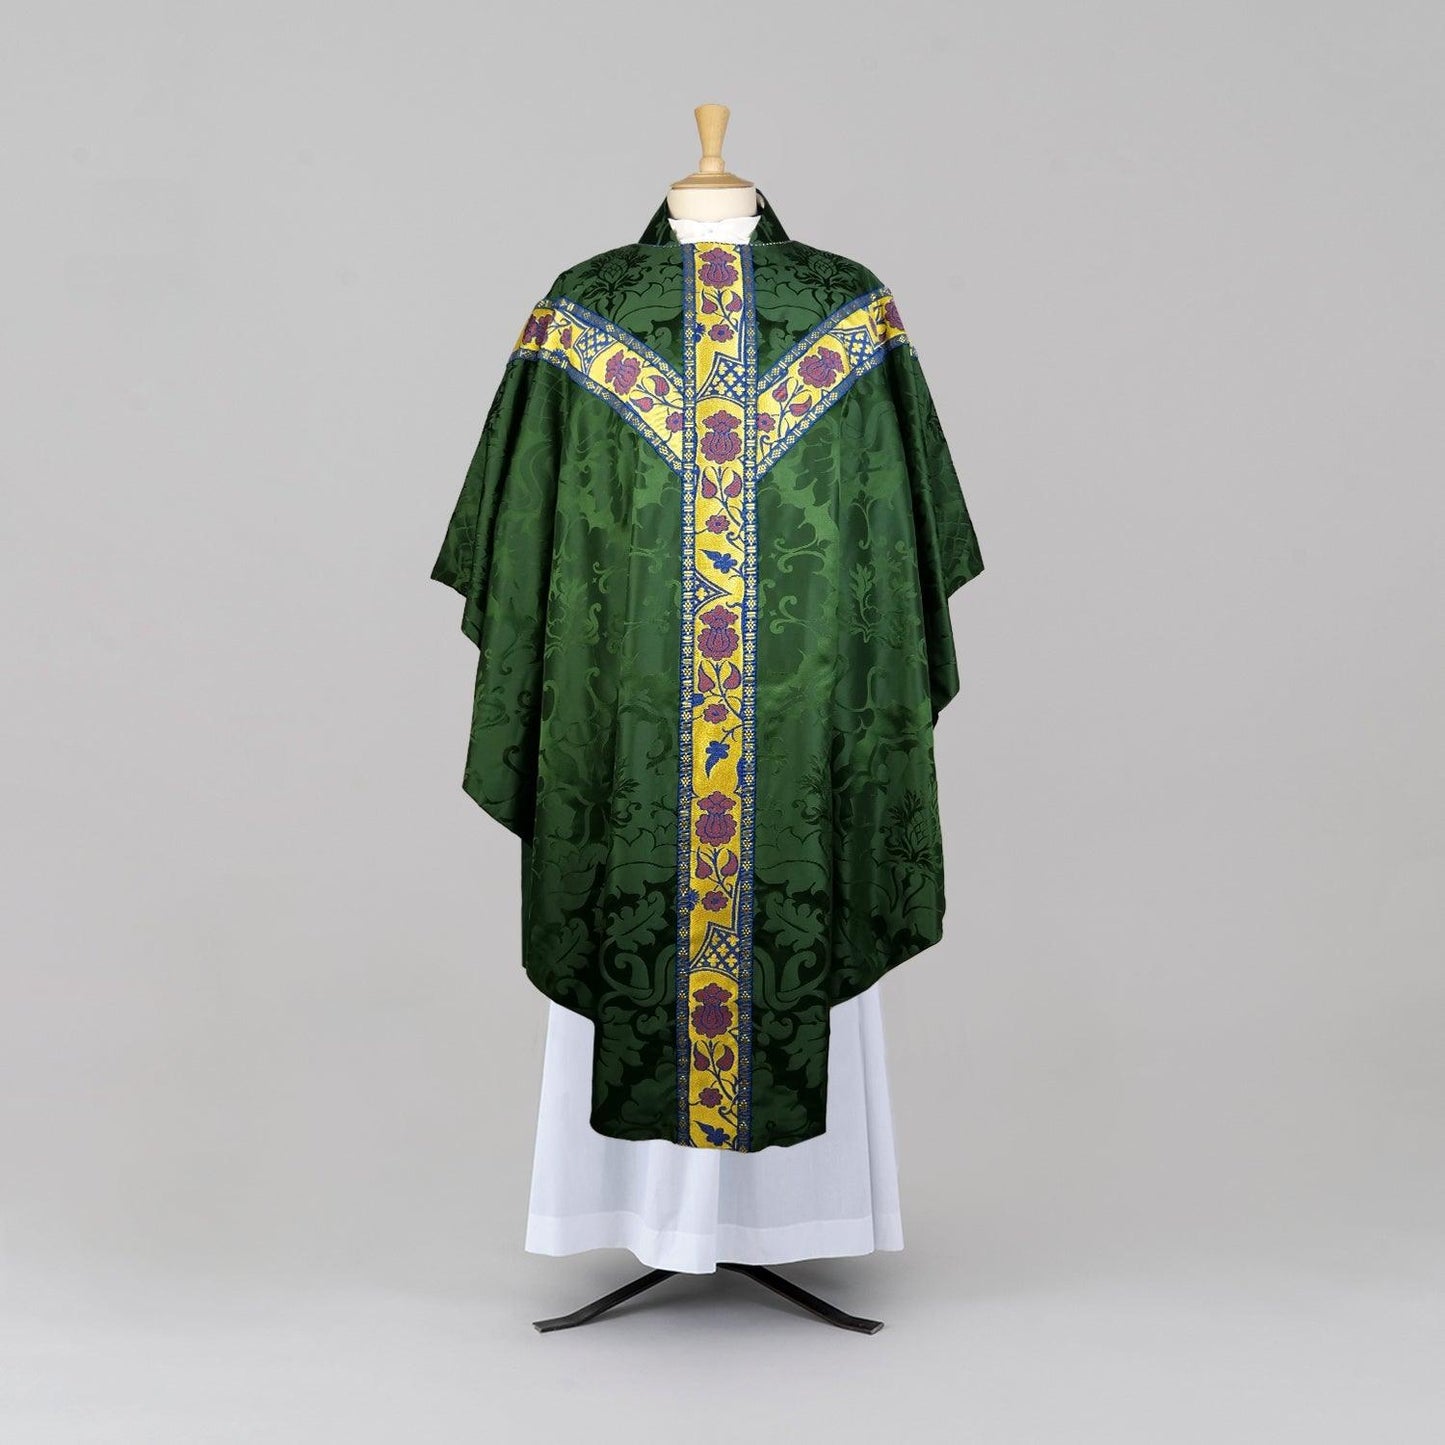 Full Gothic Chasuble in Green 'Bellini' with Gold/Blue/Purple 'Comper Strawberry' Orphreys - Watts & Co.